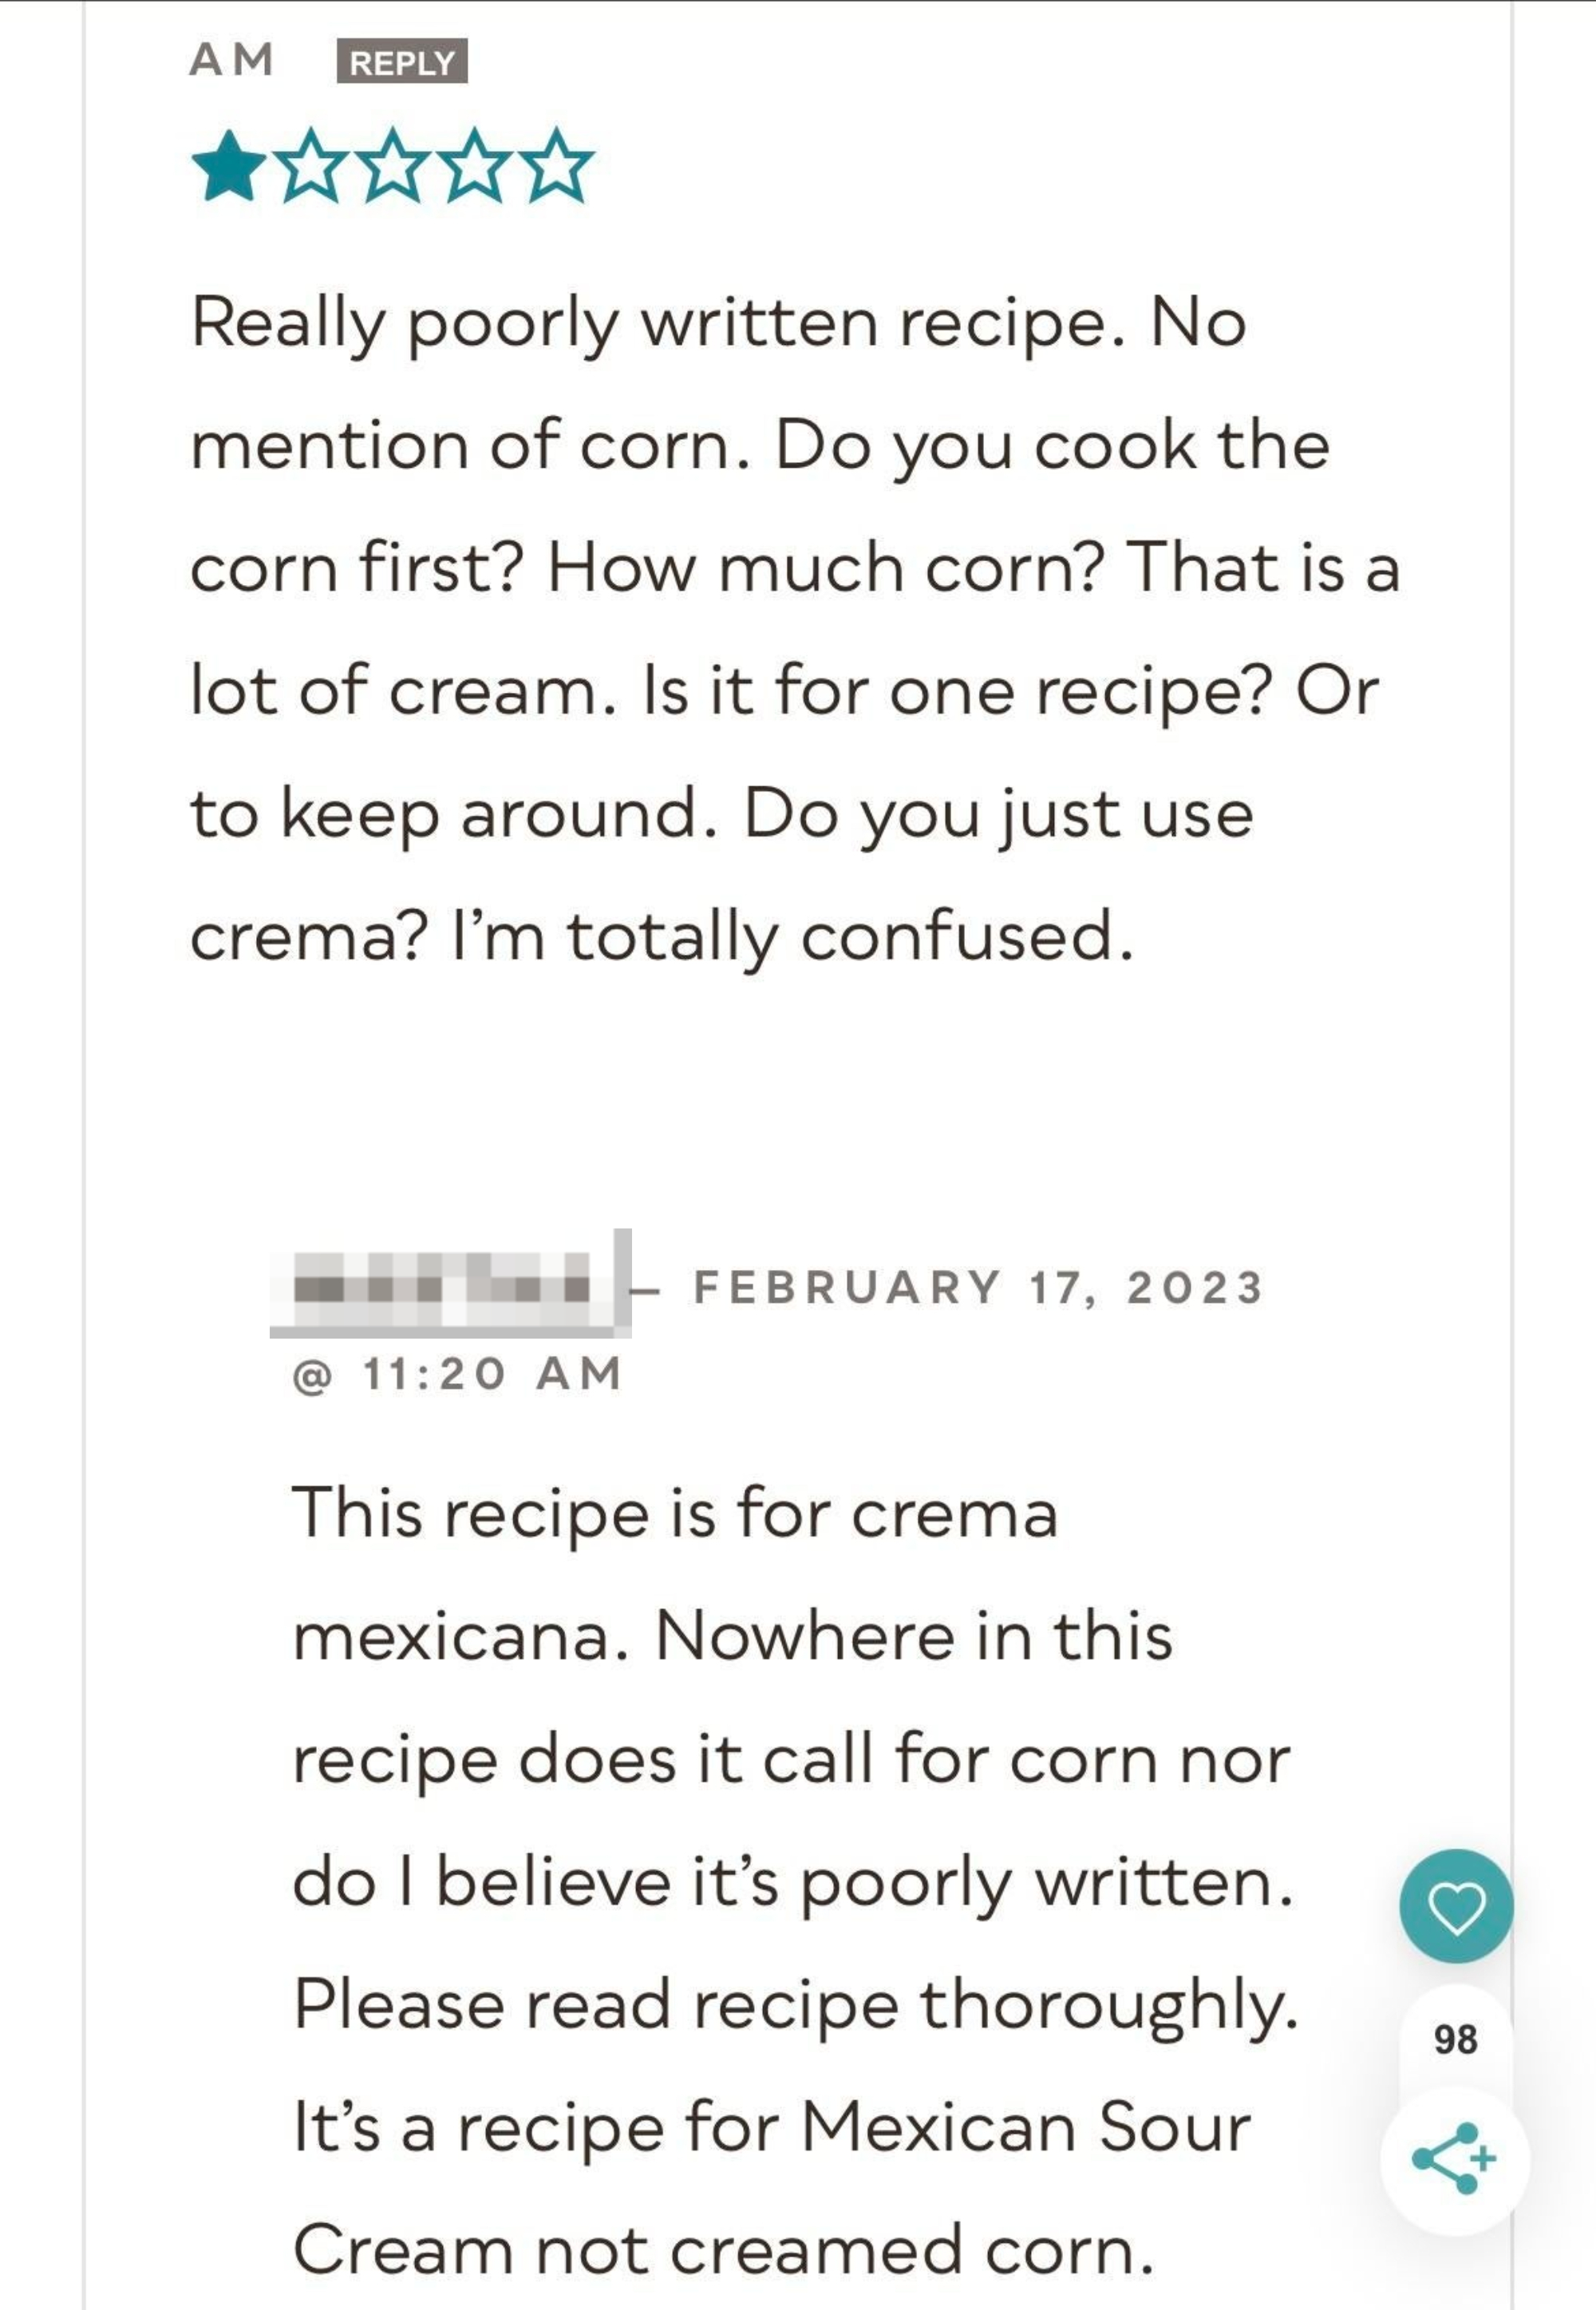 Someone giving a 1-star review of a Mexican crema/sour cream recipe because they mistakenly thought it was a creamed corn recipe